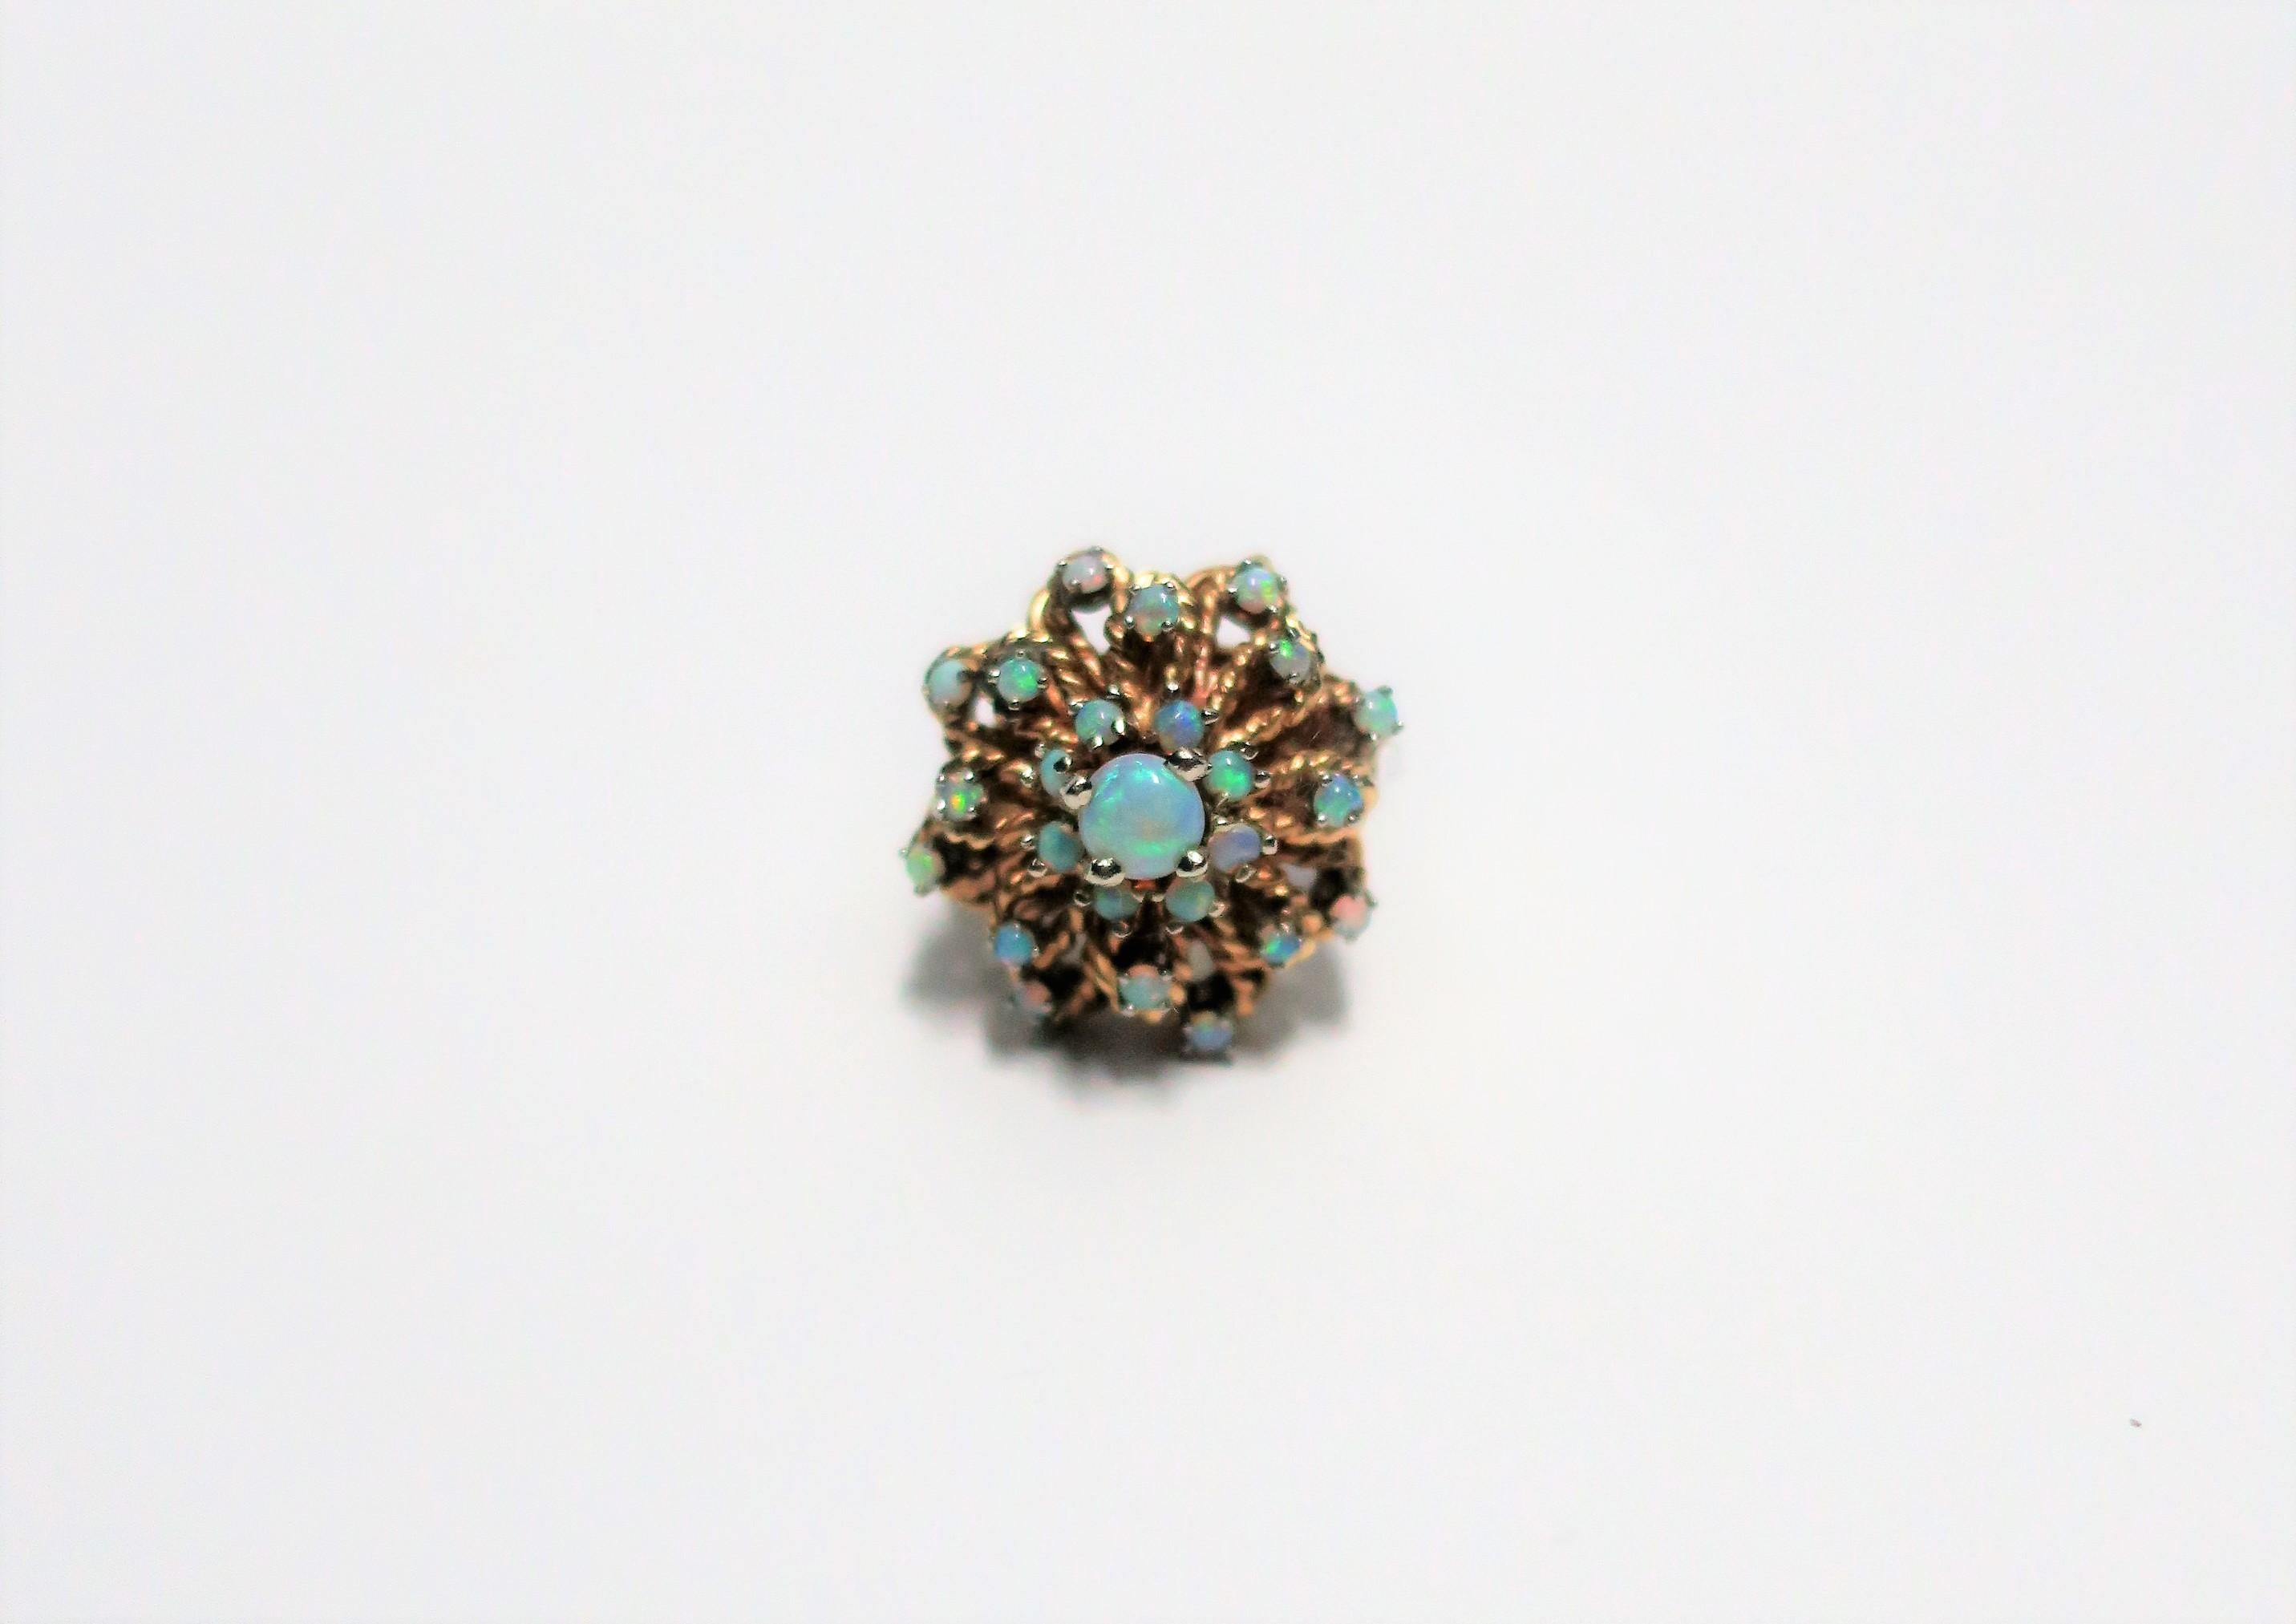 A very beautiful vintage opal gemstone and 14-Karat yellow gold cocktail ring, circa 1960s. Ring is well-made, substantial; comprised of 22 quality round opals, all prong set, with a ribbed shank/band. A rare find. A great piece that can be worn